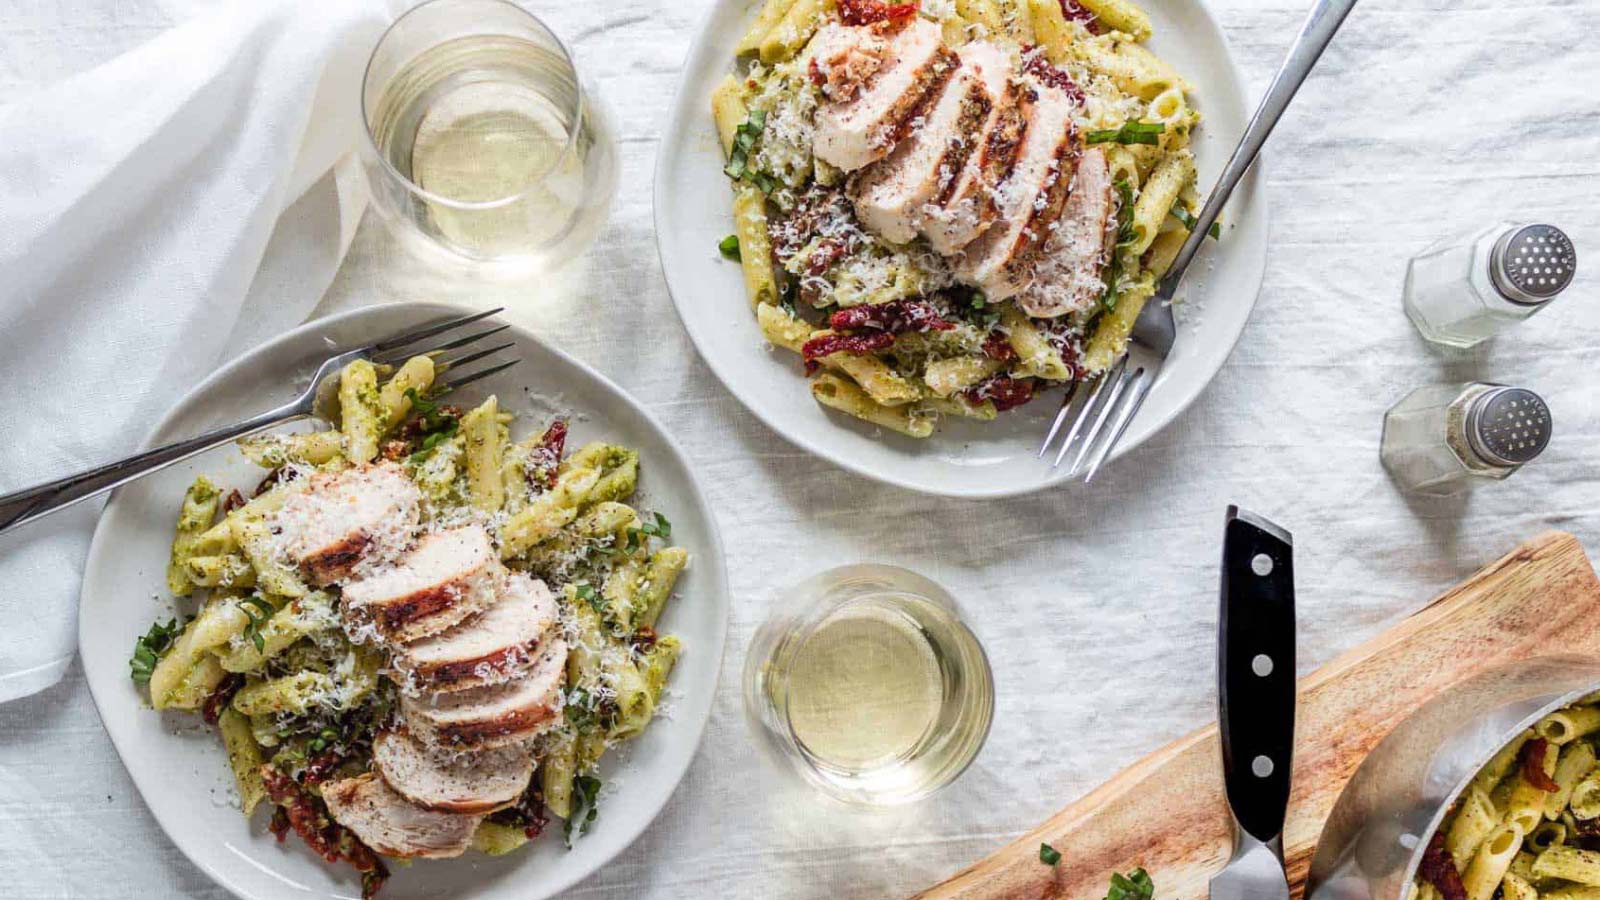 Two white plates with servings of creamy pesto pasta with chicken and sun dried tomatoes.